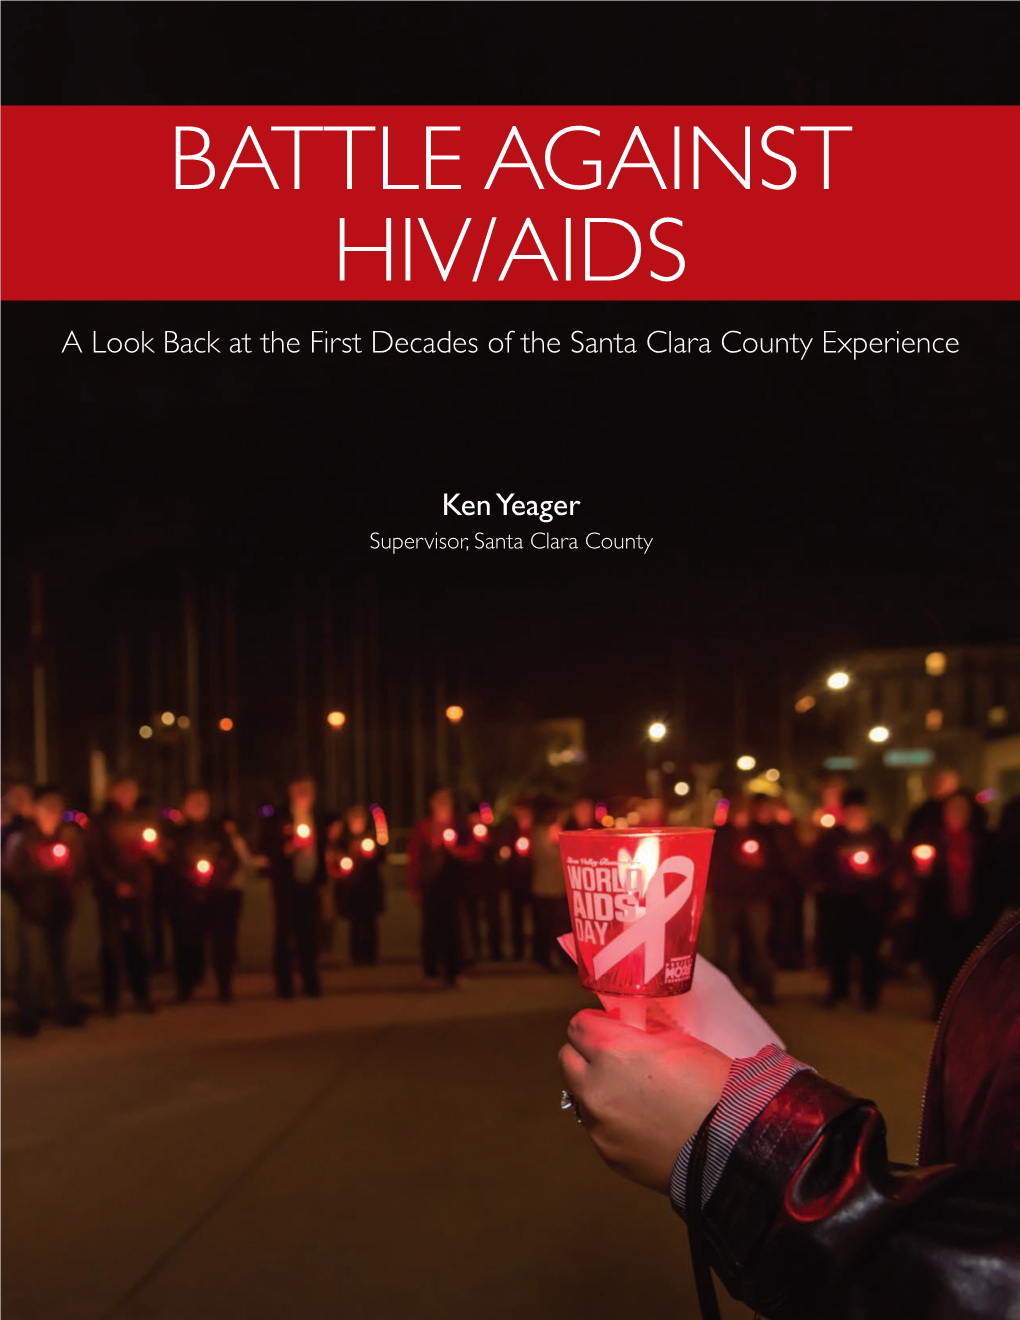 BATTLE AGAINST HIV/AIDS a Look Back at the First Decades of the Santa Clara County Experience